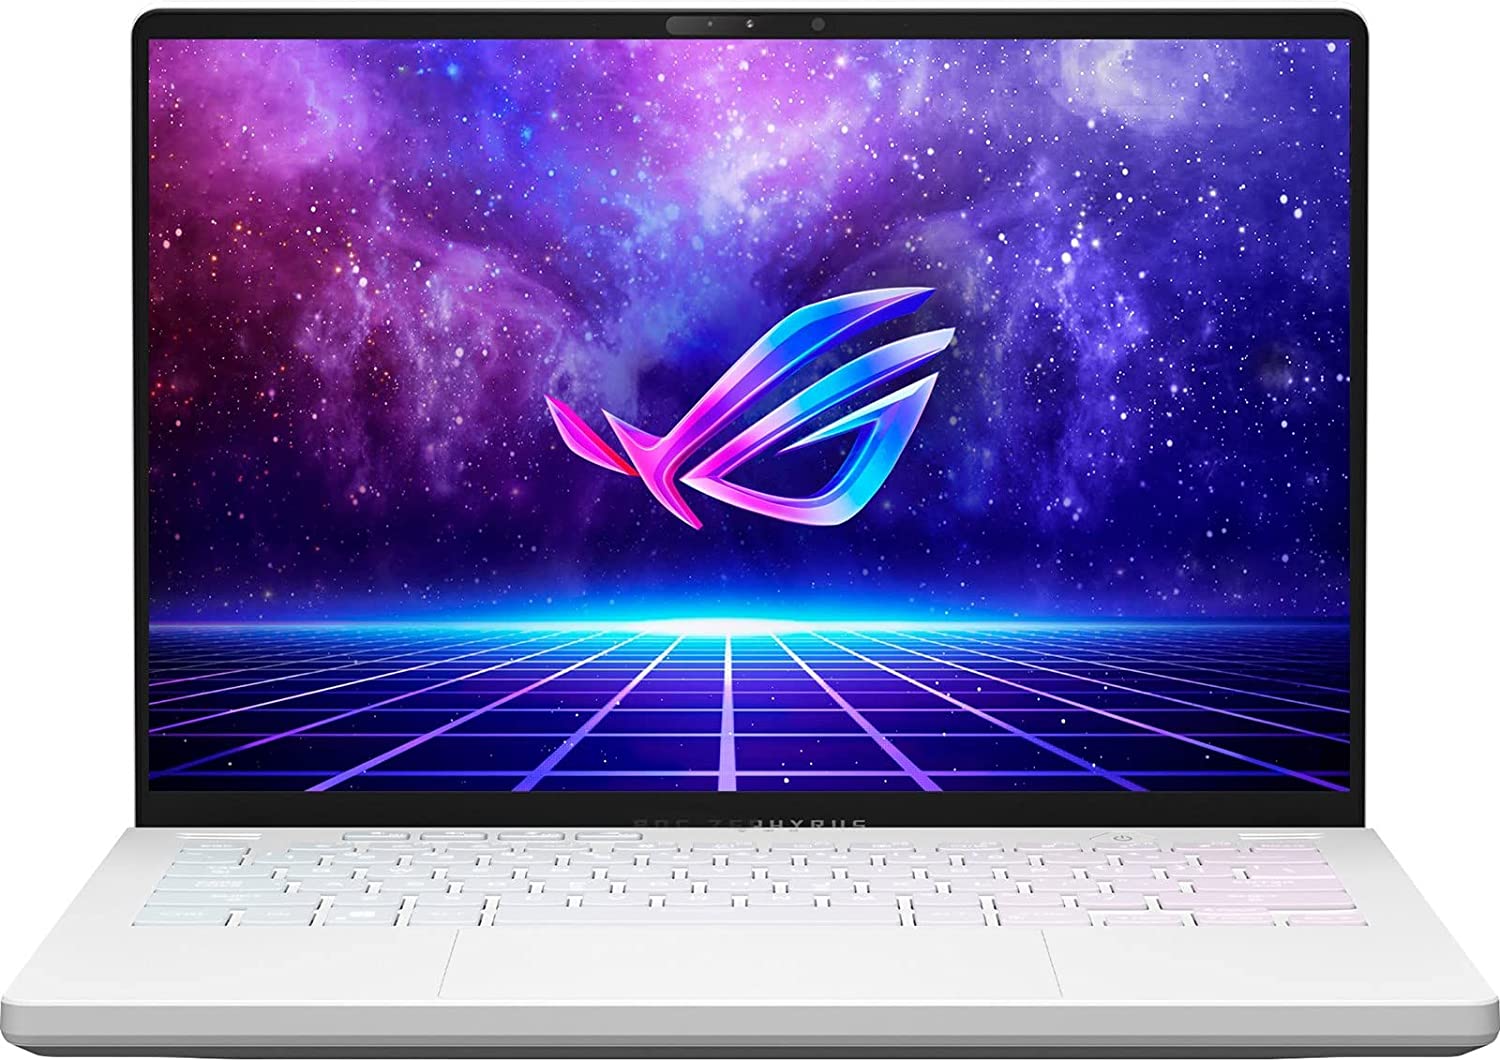 THE ROG ZEPHYRUS G14 FROM ASUS IS THE ONE TO GET